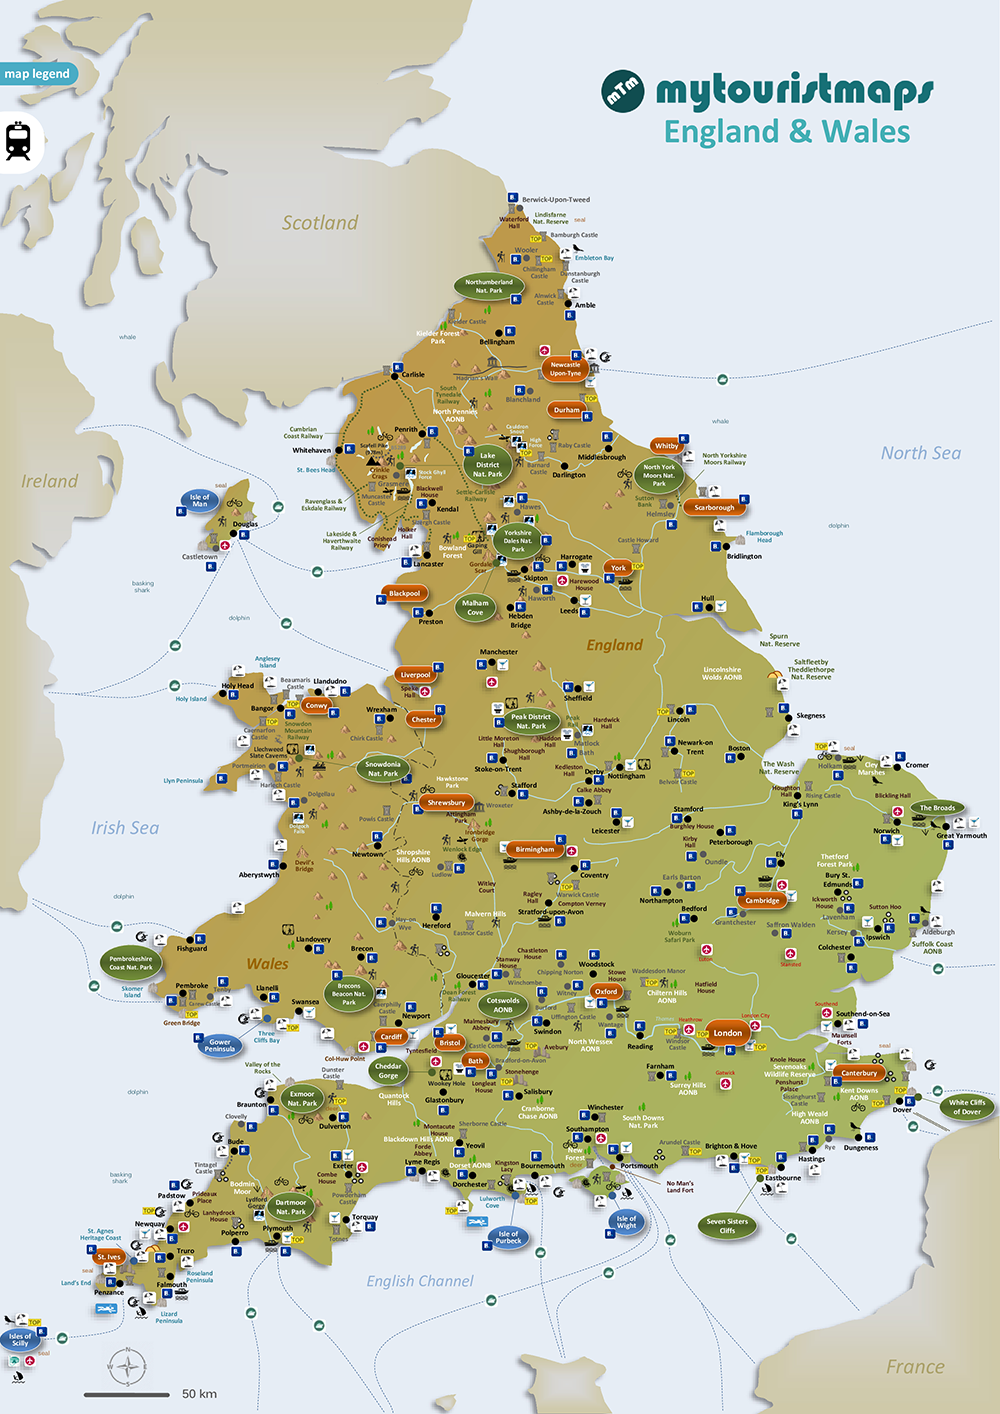 Tourist map of England & Wales